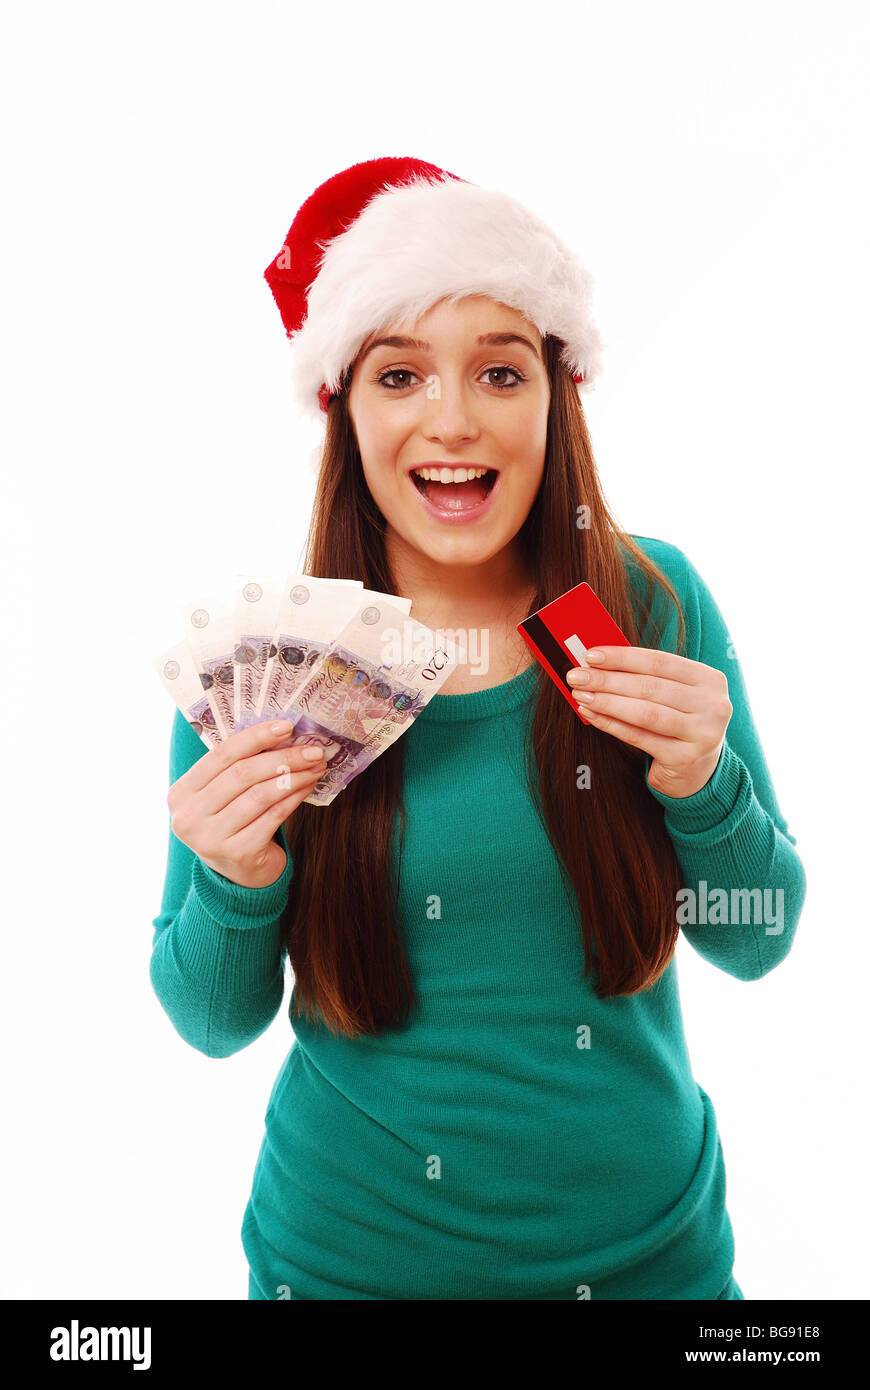 Young girl holding cash and a credit card Stock Photo